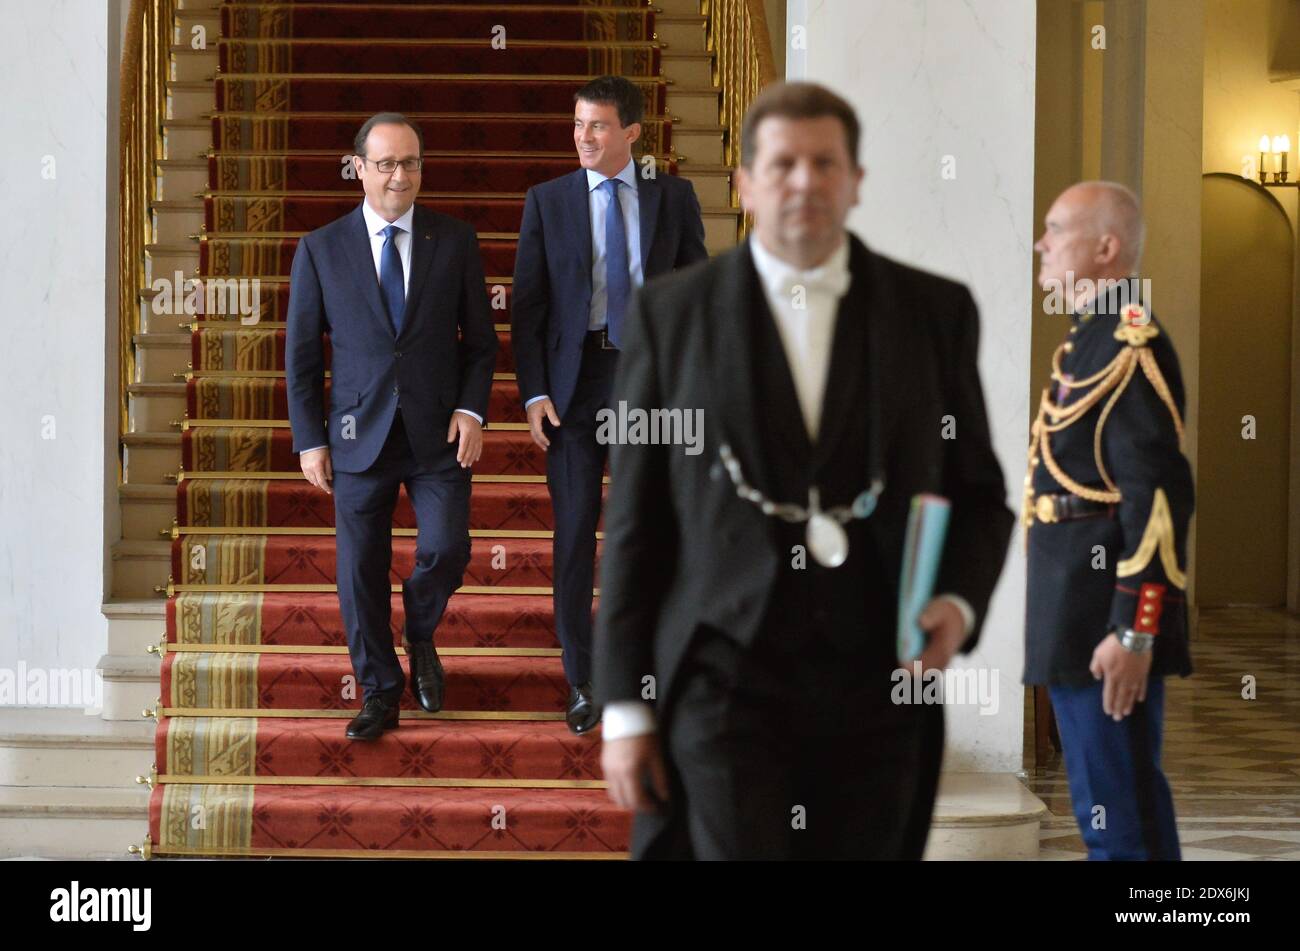 President Francois Hollande and Prime Minister Manuel Valls leave after the weekly cabinet meeting at the Elysee presidential palace in Paris, France, August 27, 2014. Hollande installed a former Banker Emmanuel Macron, a 36-year-old ex-Rothschild banker and architect of the president's economic policy. Photo Thierry Orban/ABACAPRESS.COM Stock Photo